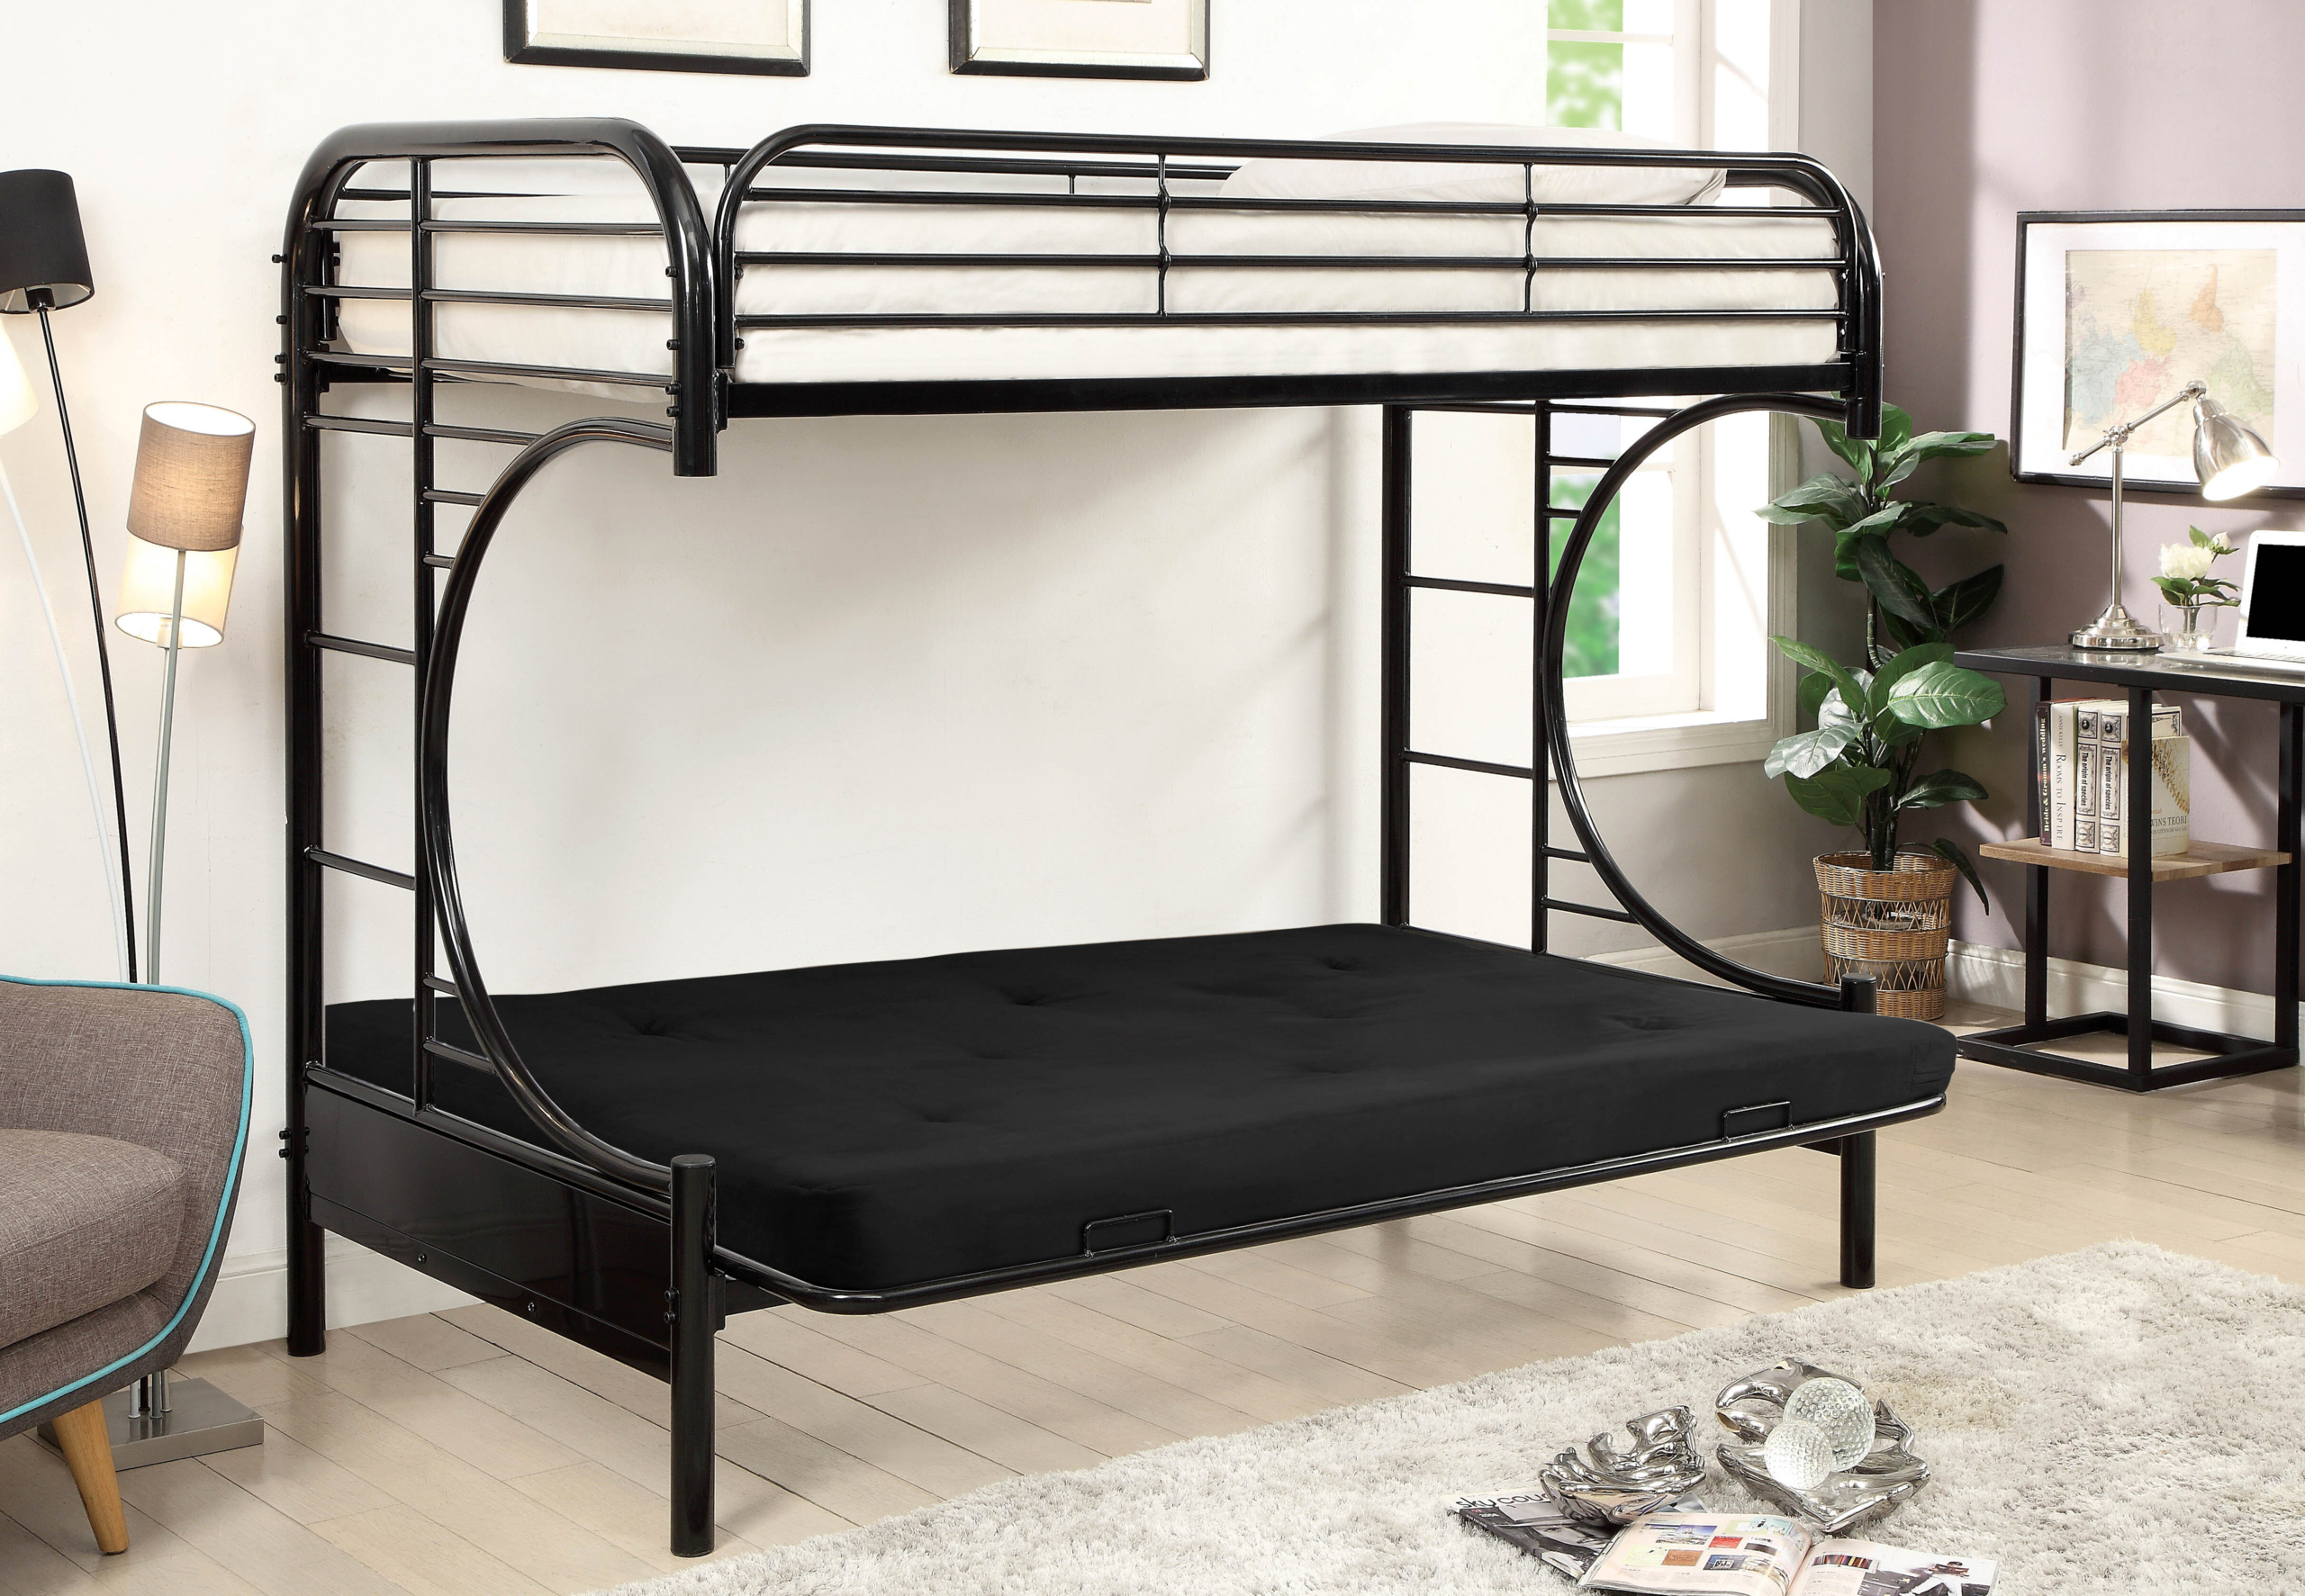 Full Over Futon Bunk Bed Visualhunt, Bunk Bed With Futon Below